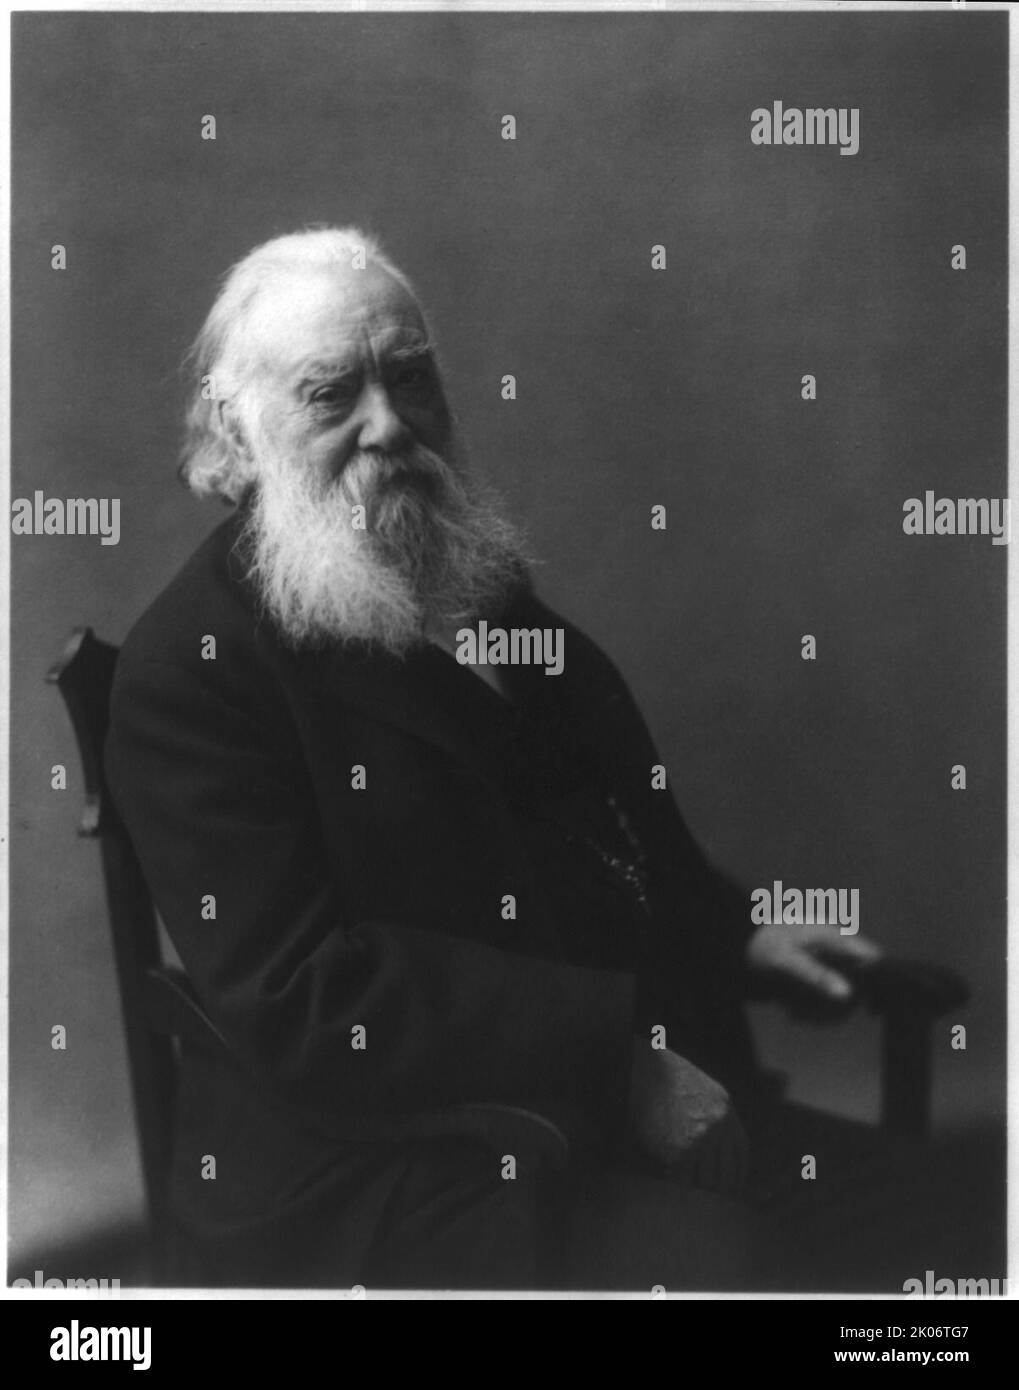 Alexander Melville Bell, 1819-1905, c1900. Three-quarter length portrait, seated, facing right. [Teacher and researcher of physiological phonetics; author of works on orthoepy and elocution; inventor of Visible Speech which was used to help the deaf learn to talk. Father of Alexander Graham Bell]. Stock Photo